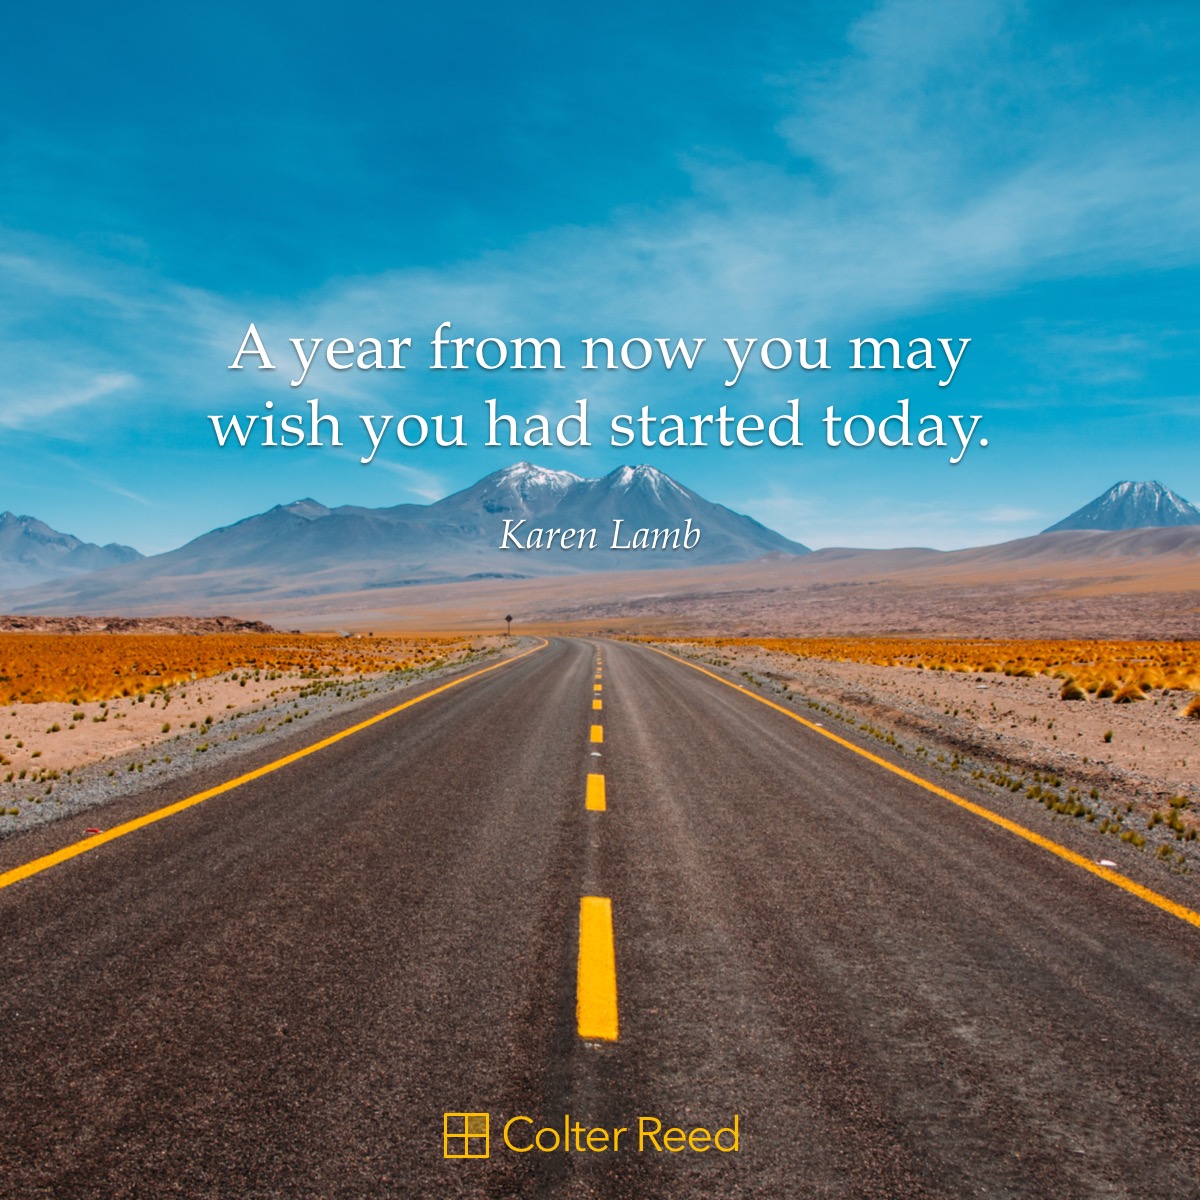 A year from now, you may wish you had started today. —Karen Lamb